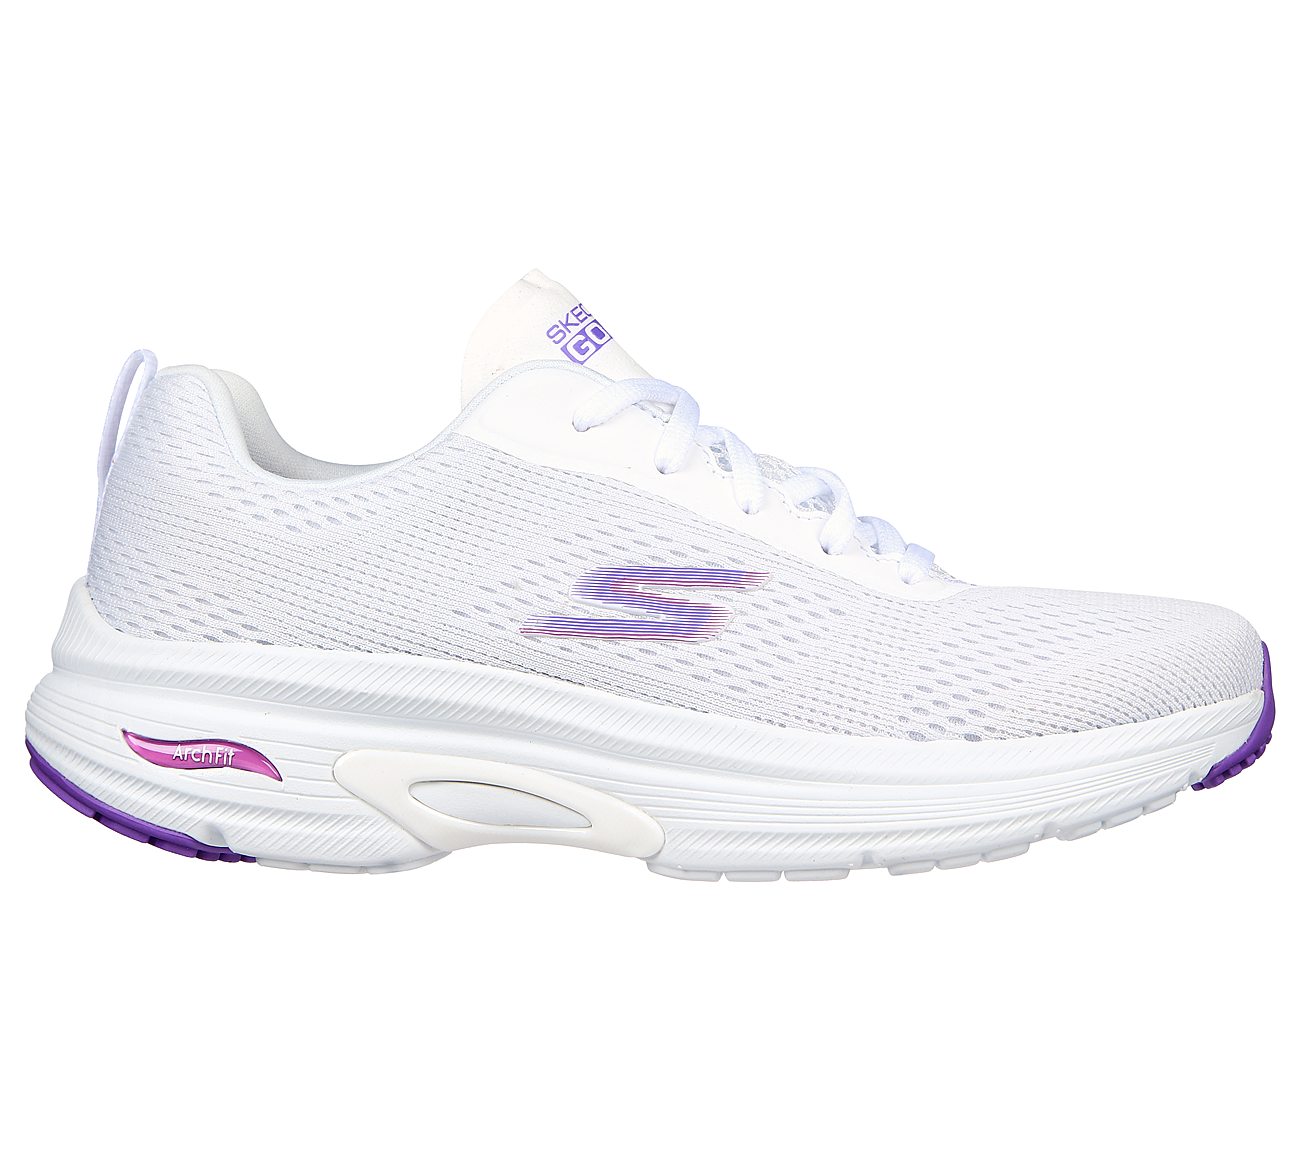 GO RUN ARCH FIT - SKYWAY, White image number null